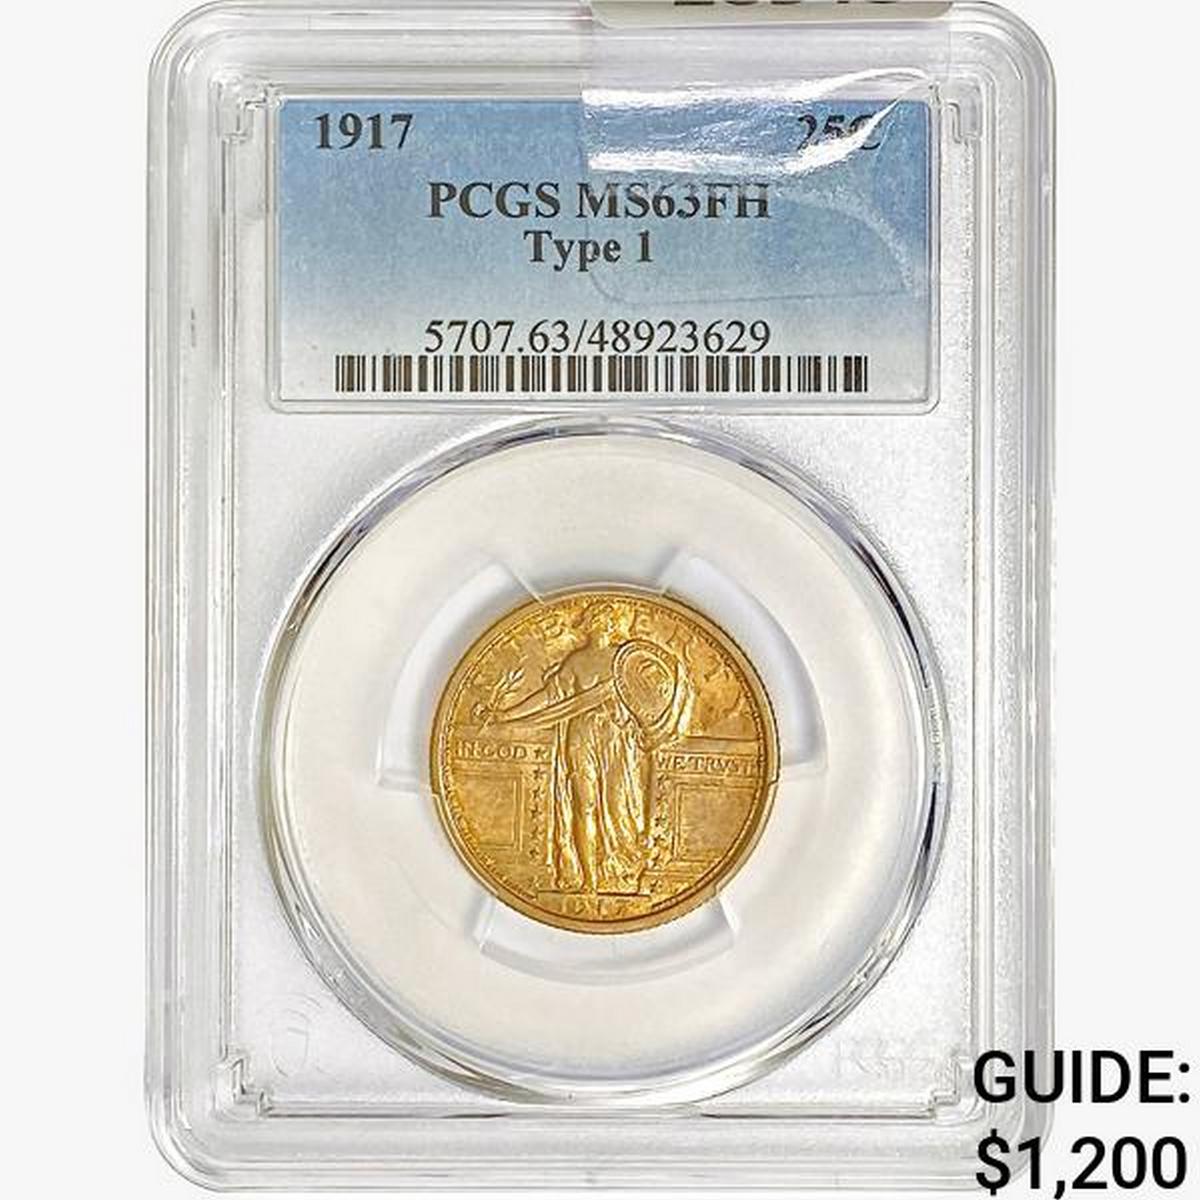 1917 Standing Liberty Quarter PCGS MS63 FH, Ty 1